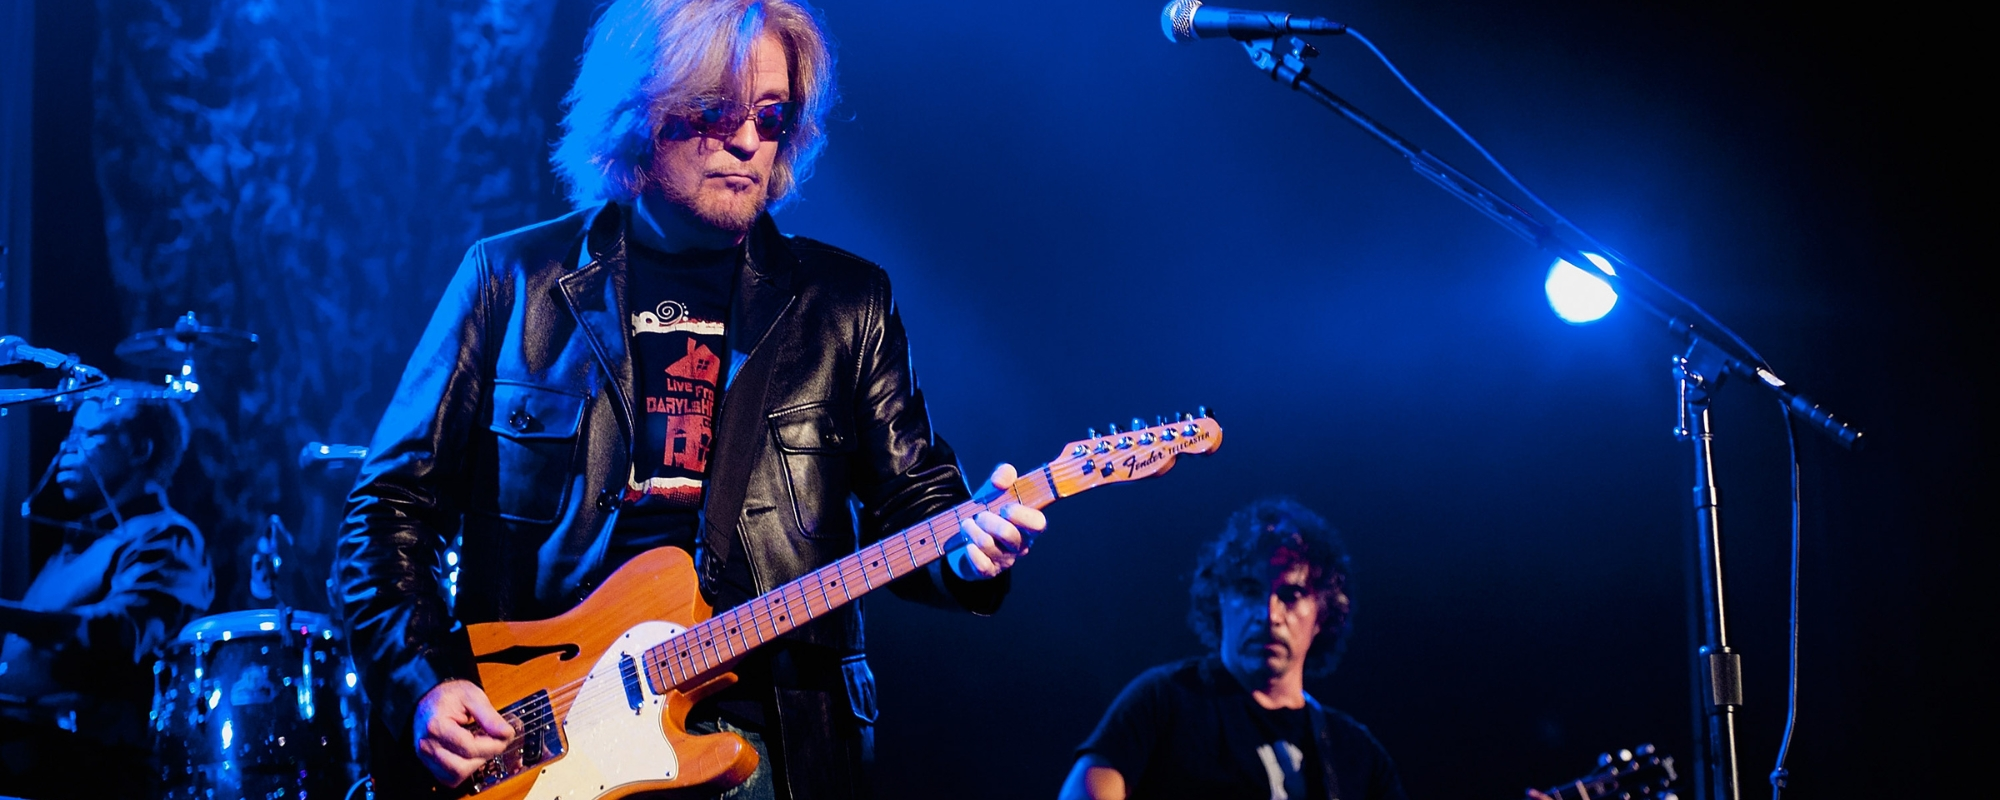 Hall & Oates Open Up About Their Split and Ongoing Legal Battle